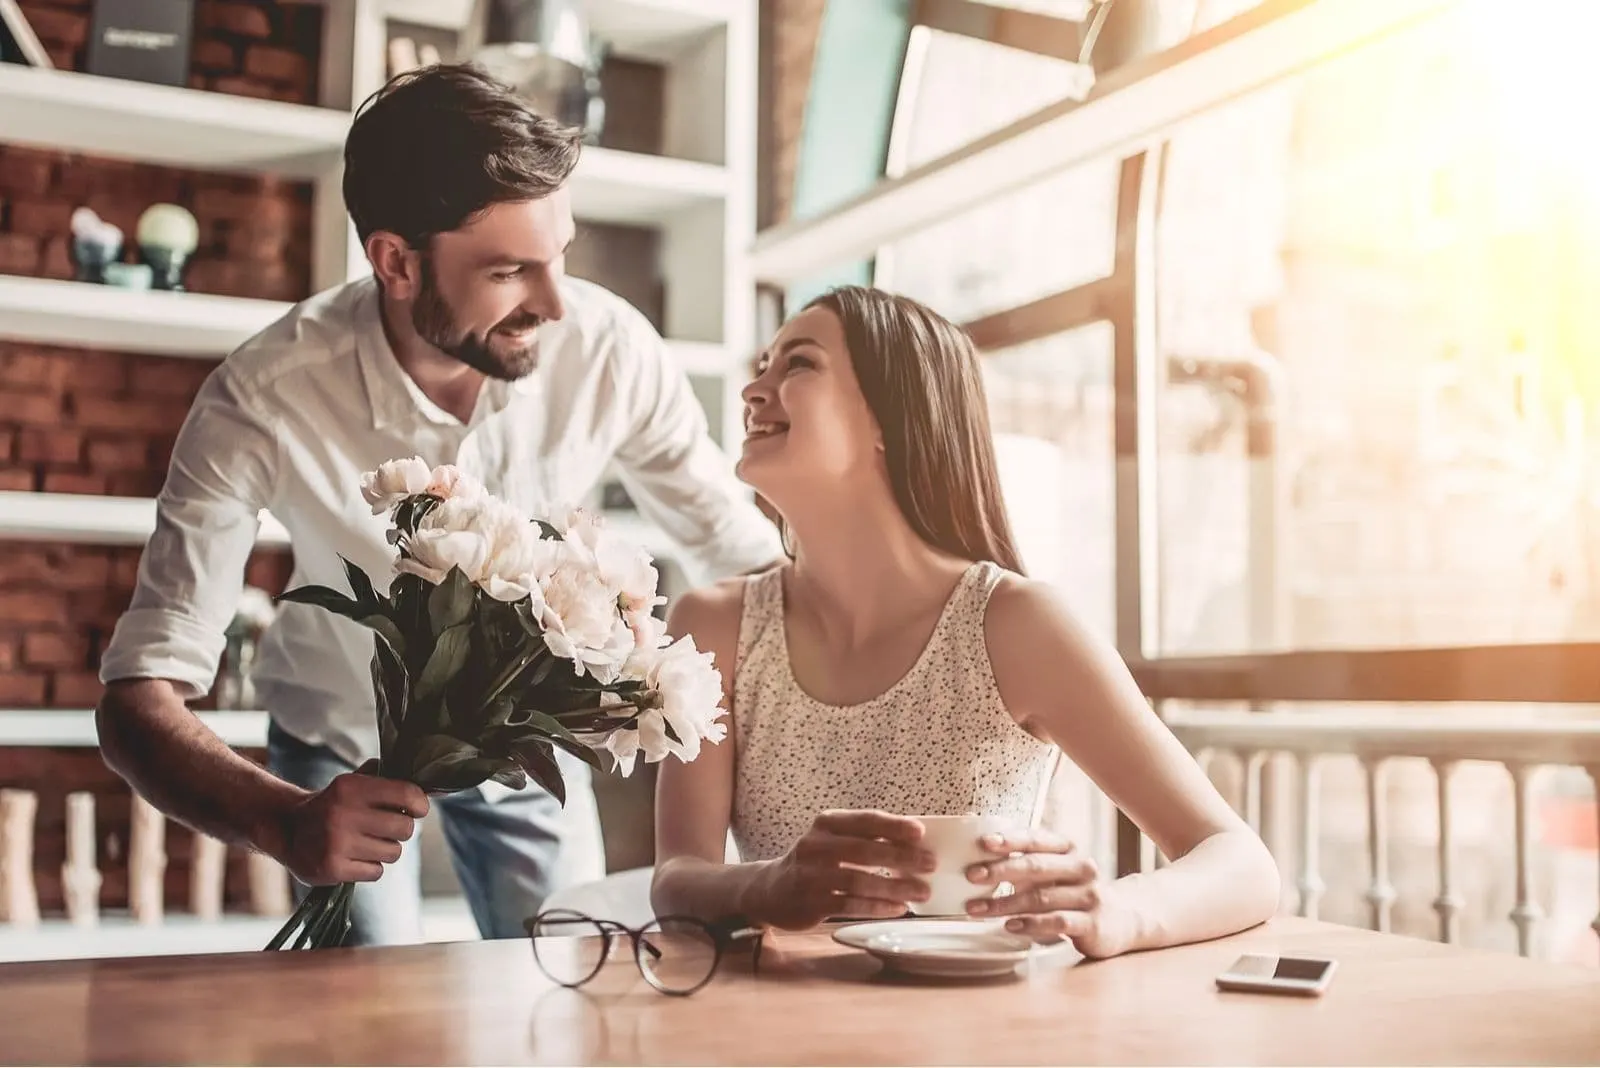 man giving flower to a beautiful woman sitting inside the cafe lloking surprised